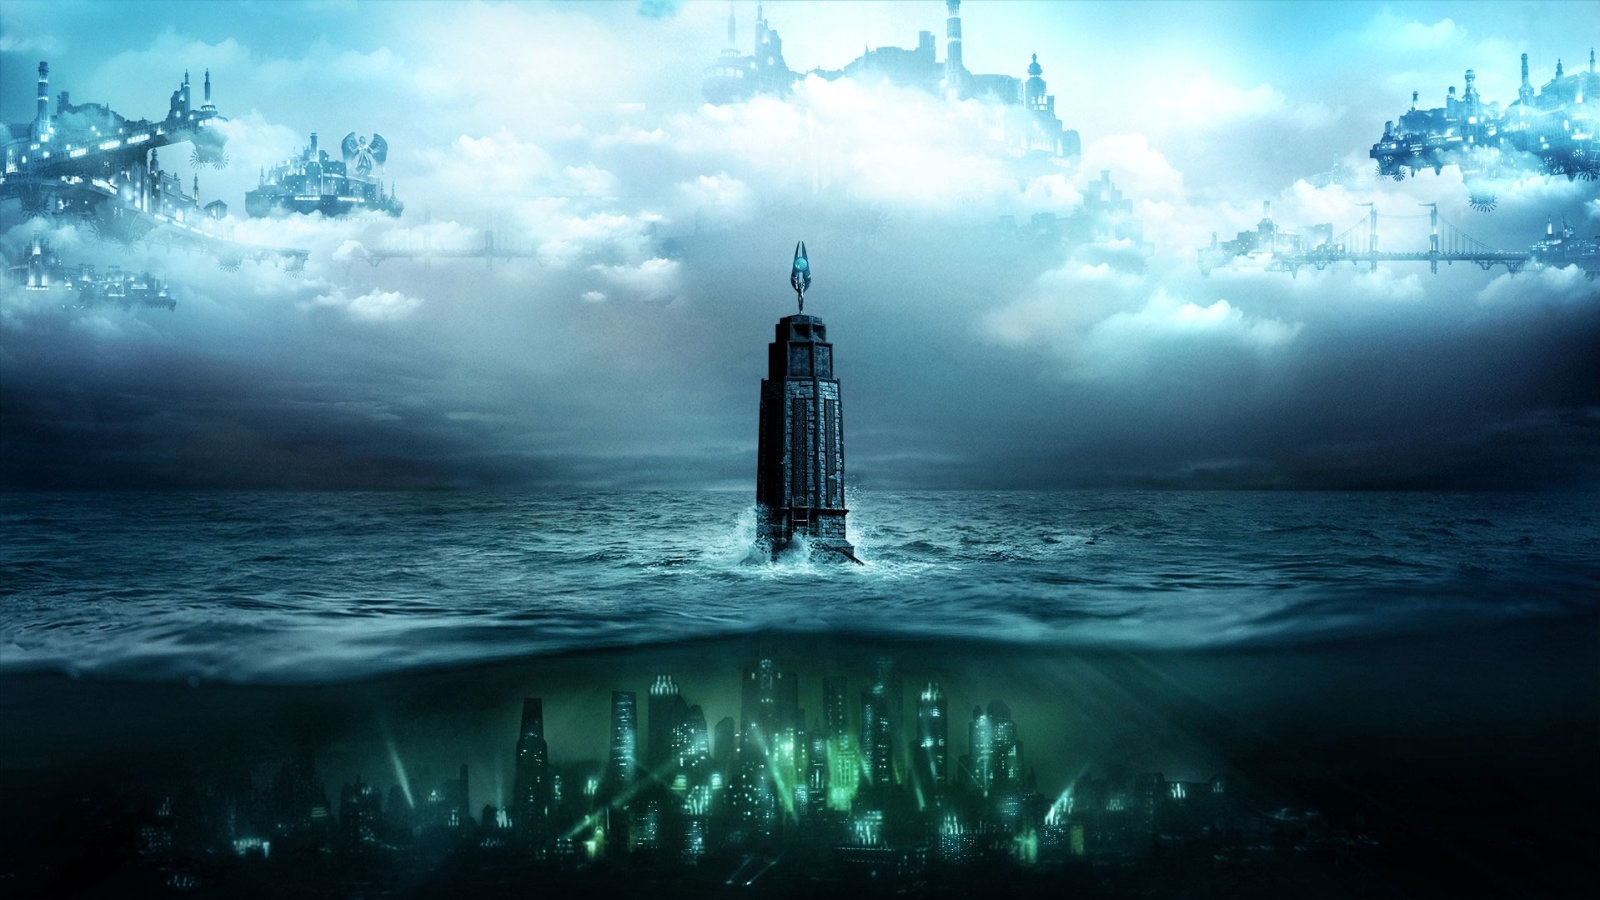 A new BioShock game is in development | DeviceDaily.com